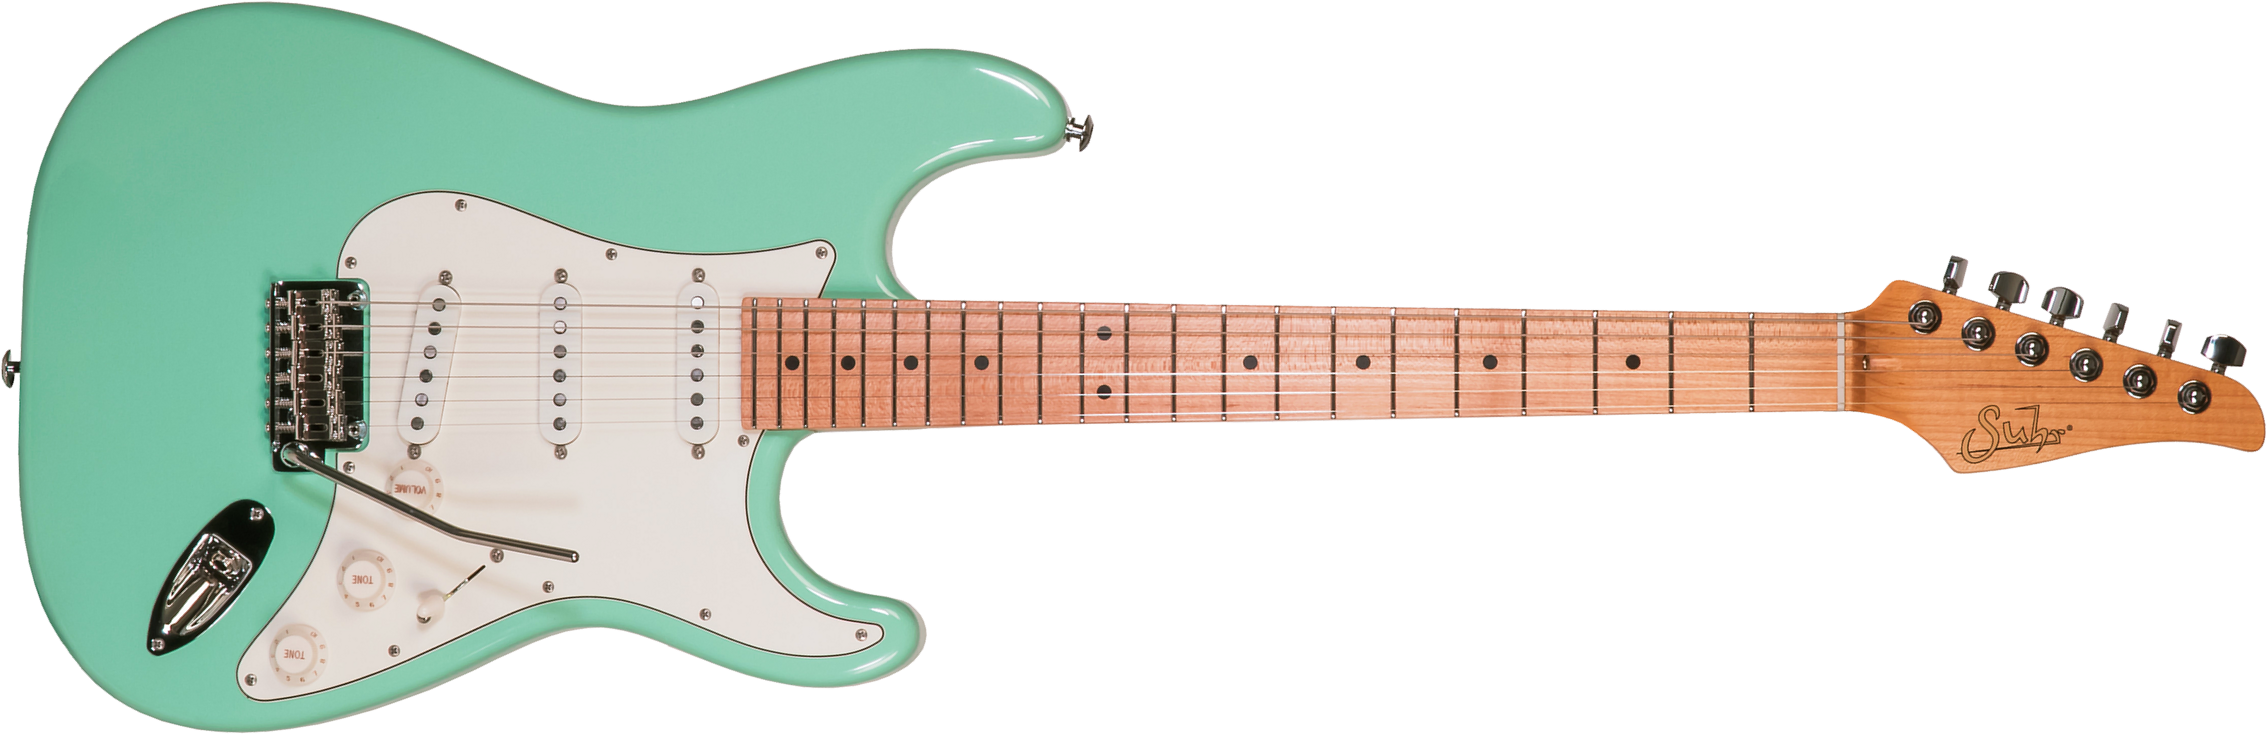 Suhr Classic S Antique Sss 01-csa-0020 3s Trem Mn #71418 - Light Aging Surf Green - E-Gitarre in Str-Form - Main picture